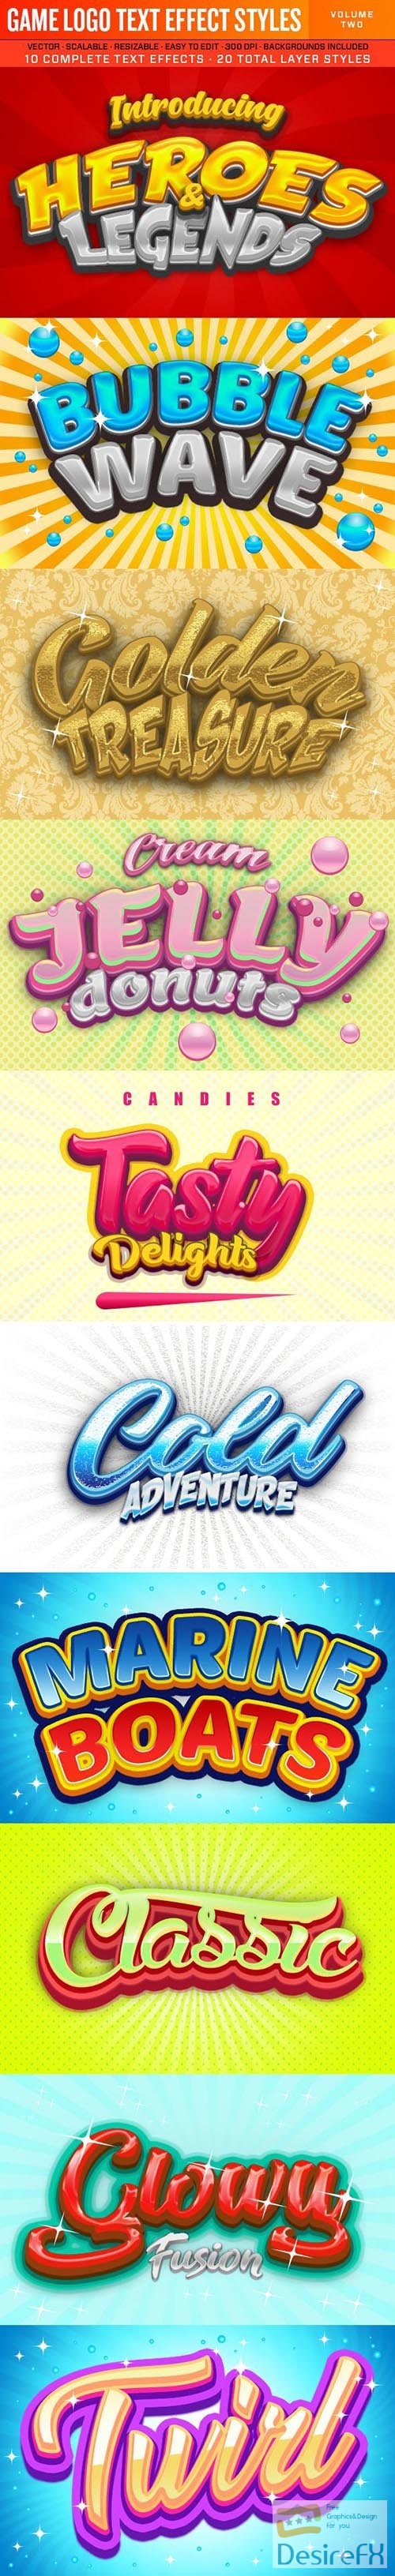 GraphicRiver - Game Logo Text Effect Styles 2 23685438